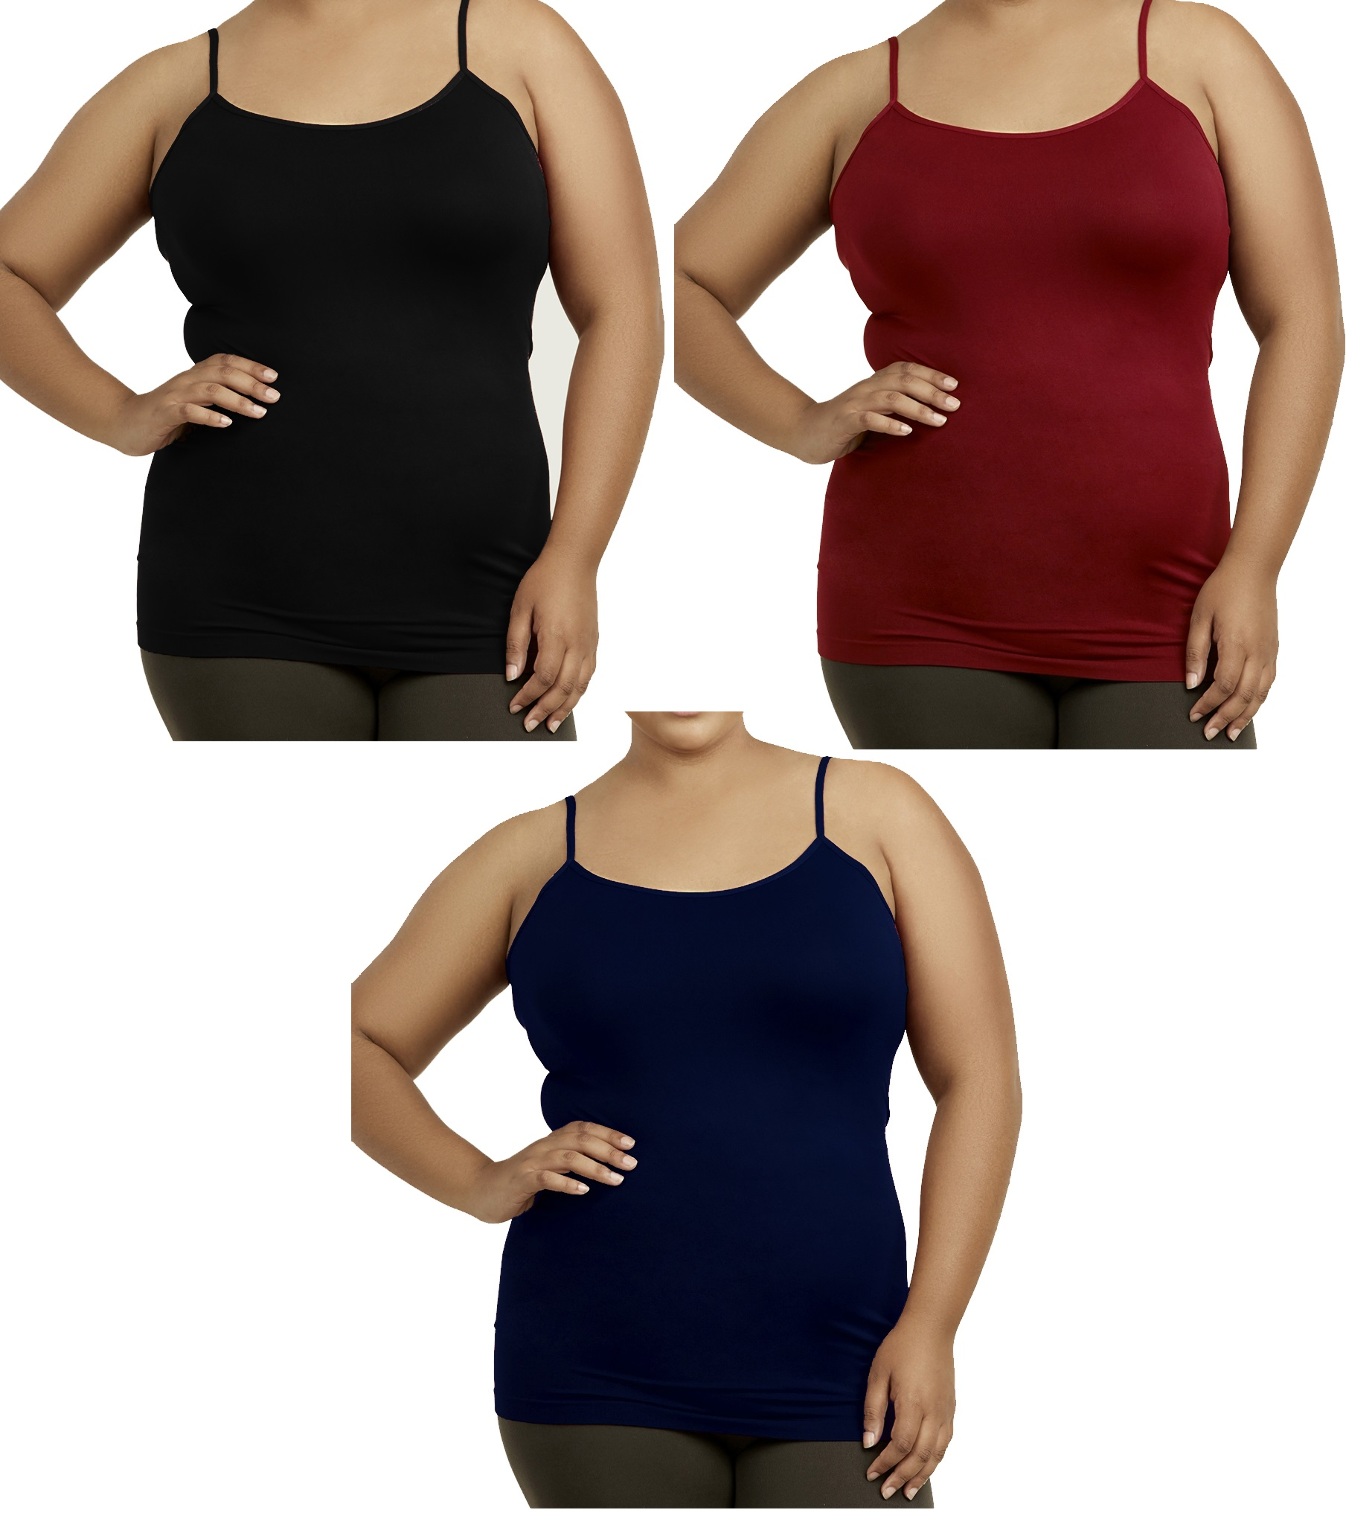 Wholesale Women's Plus Size Camisoles in Assorted Colors - DollarDays